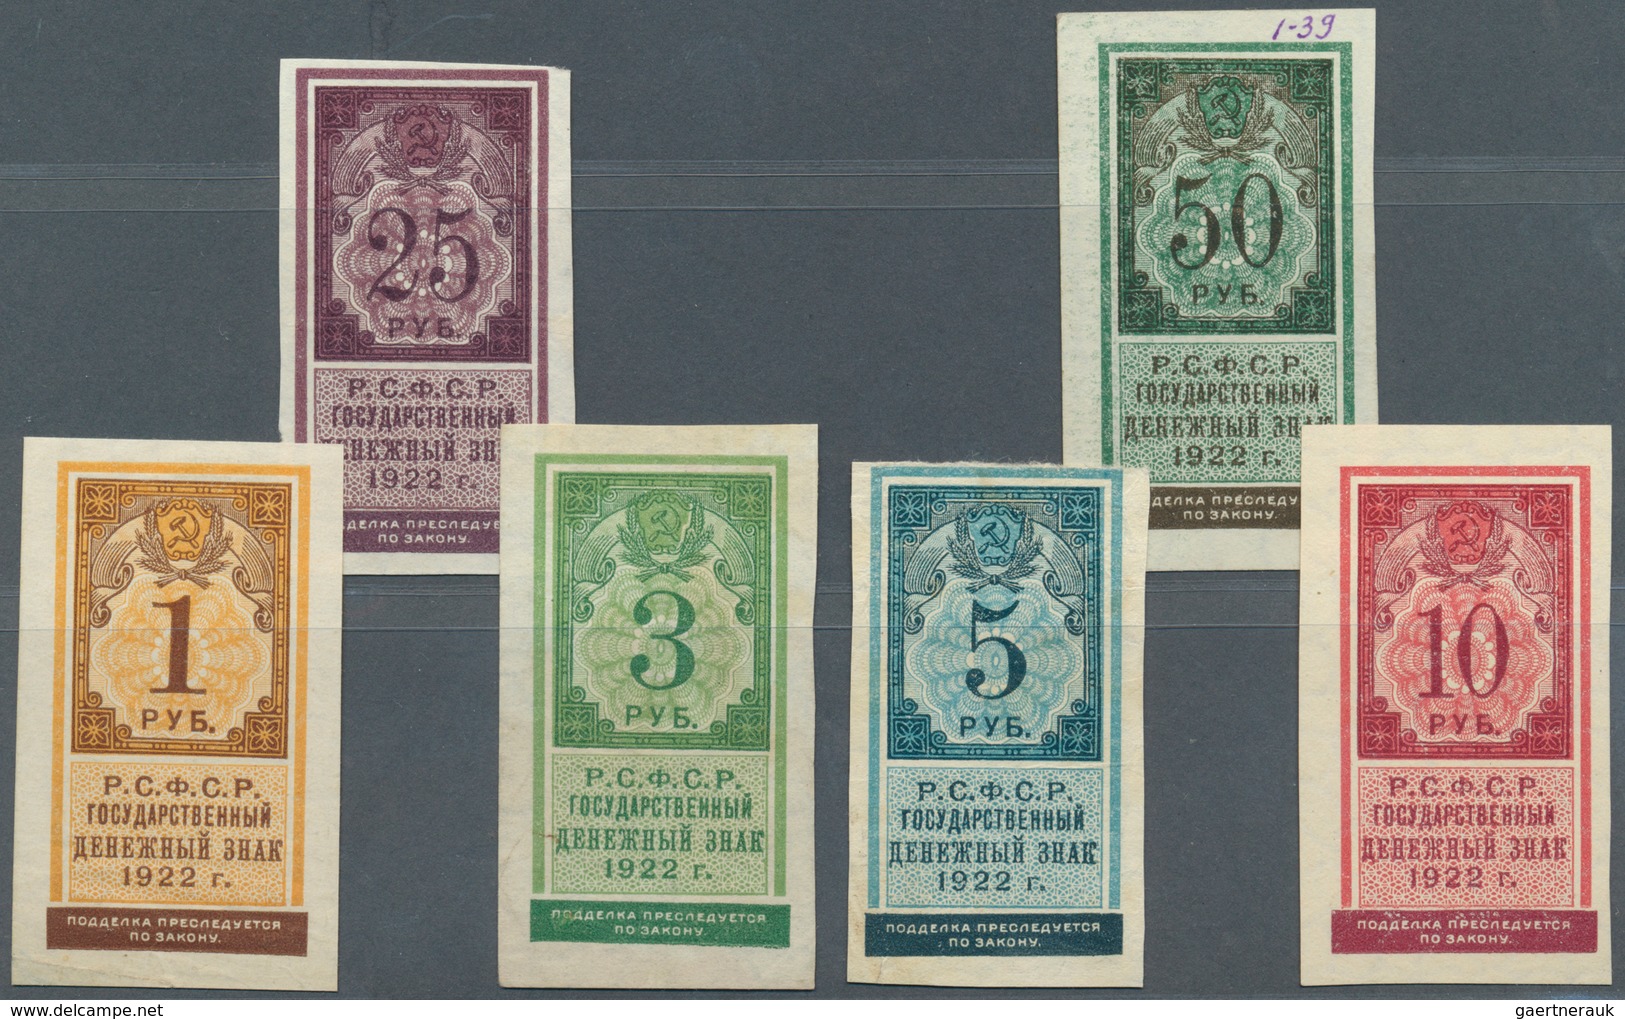 02268 Russia / Russland: Full Set Of The State Currency Notes 1922 Containing 1, 3, 5, 10, 25 And 50 Ruble - Rusland